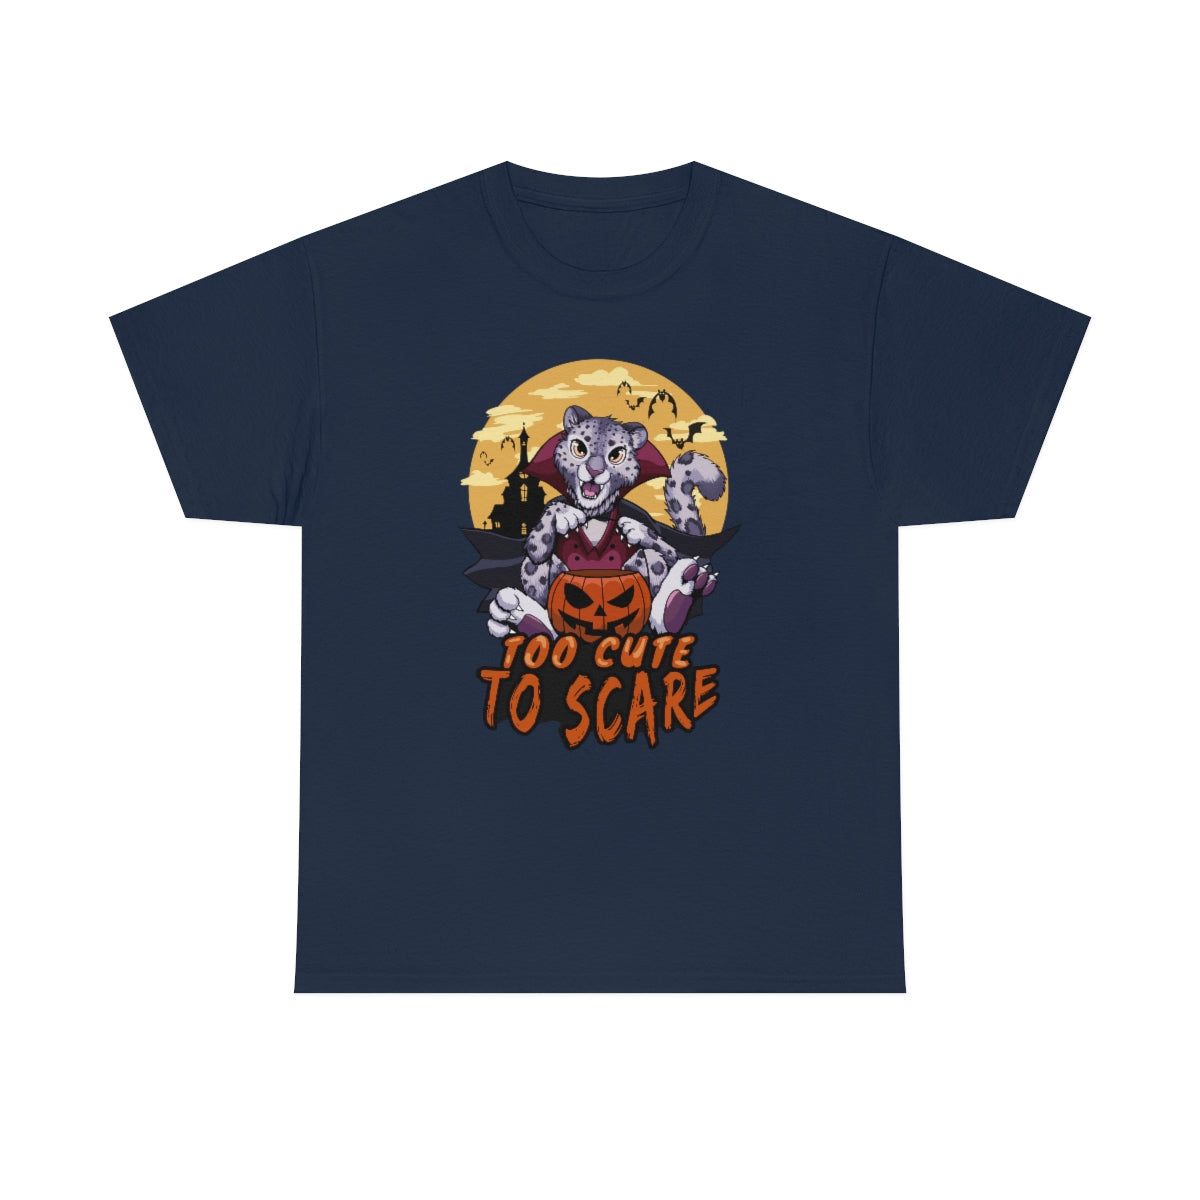 Too Cute to Scare - T-Shirt T-Shirt Artworktee Navy Blue S 